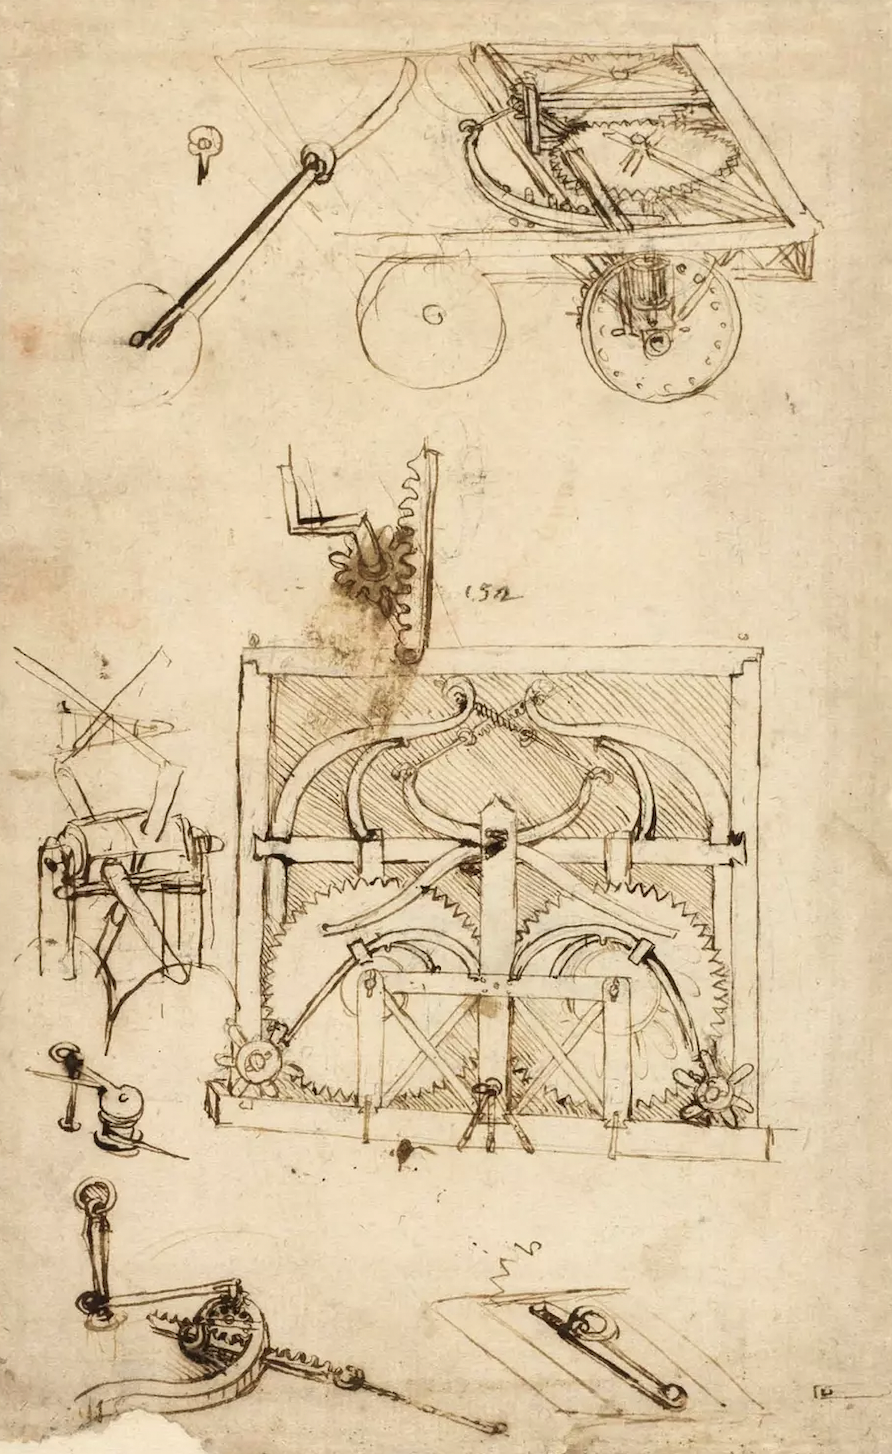 da Vinci searched throughout his life for means self propulsion, but what was essentially a wind-up car was as close as he got. A chariot without a horse is cool, but not if you have to stop every few seconds to rewind it. 